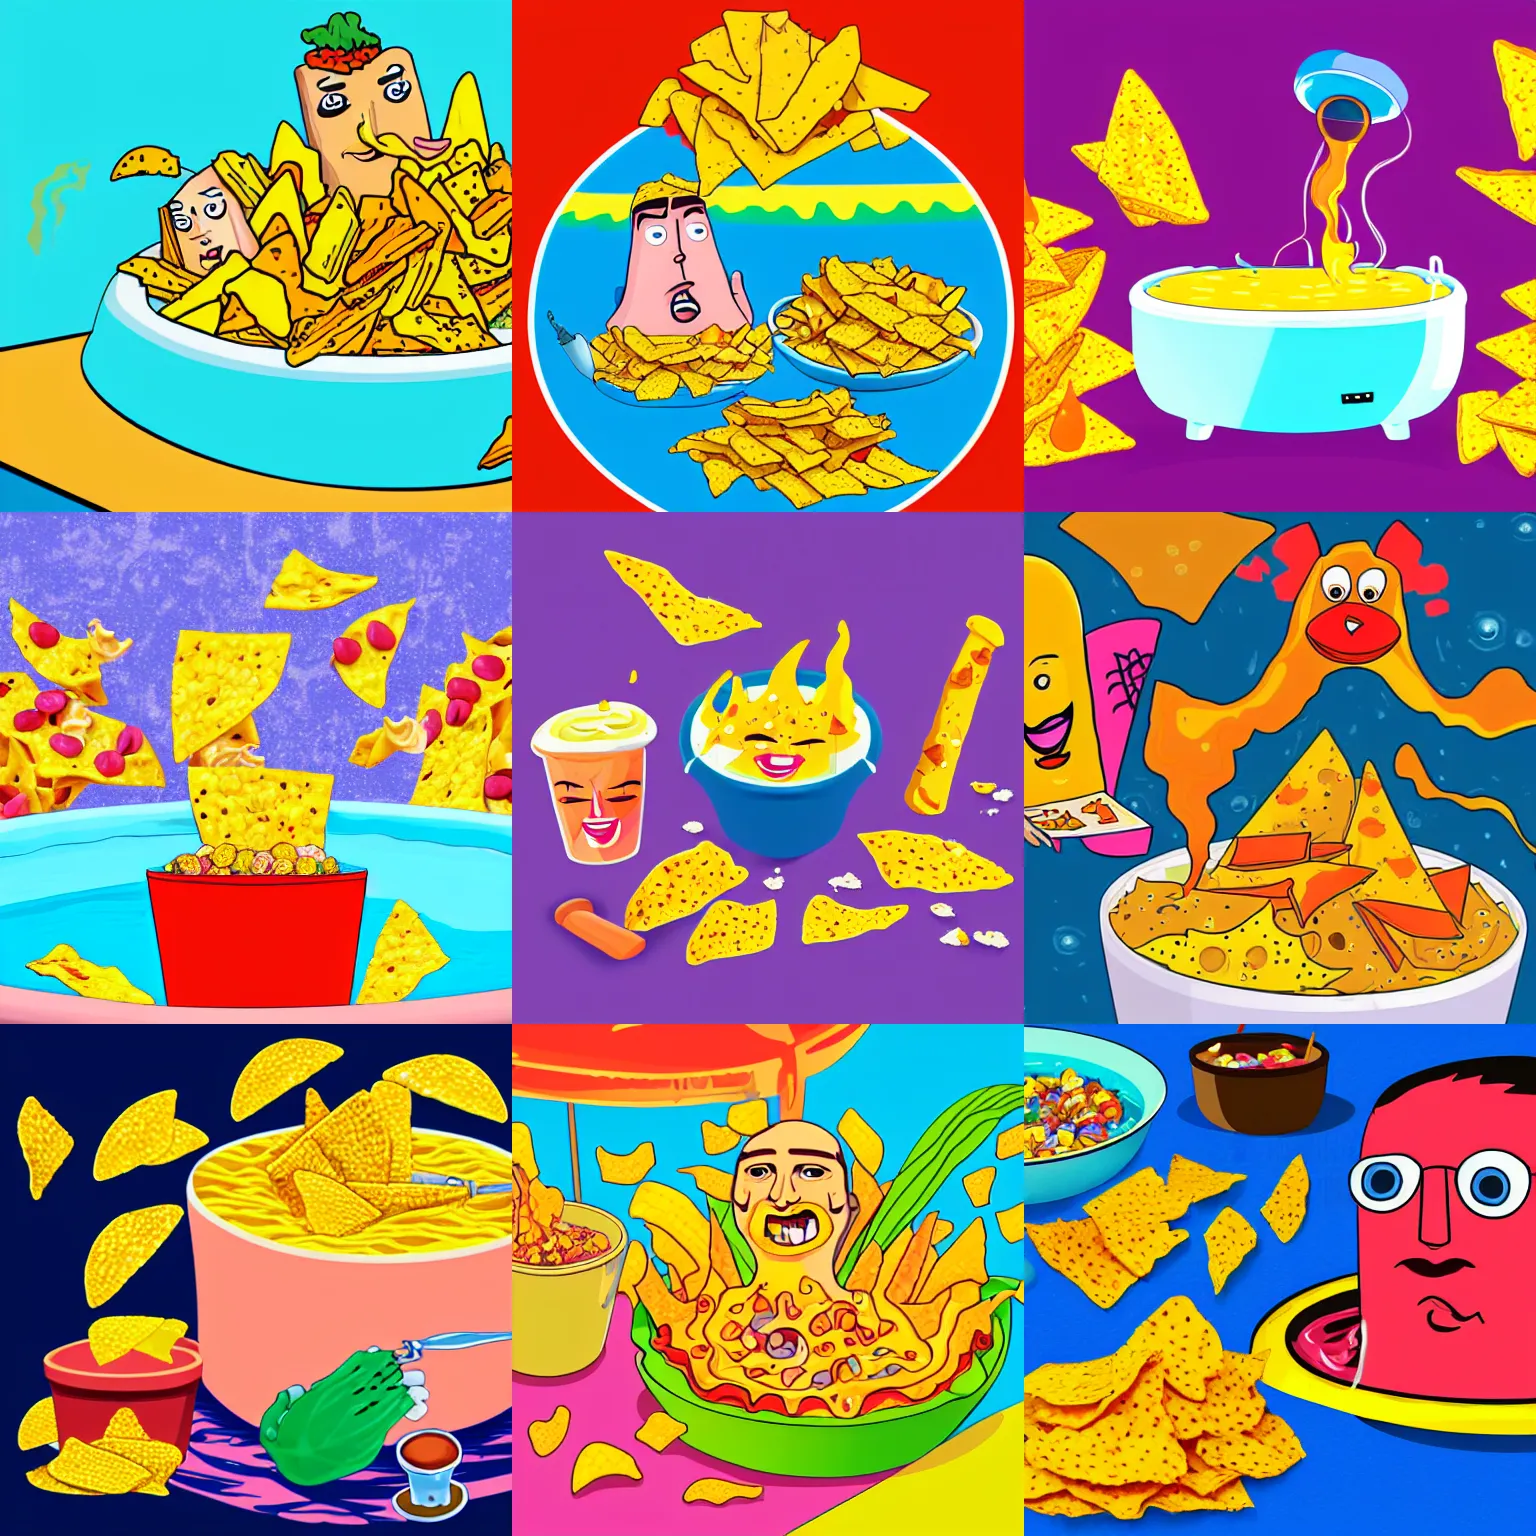 Prompt: colorful illustration of stoned corn chips with cartoon faces and arms, sitting in a hot tub full of melted nacho cheese, passing a bong